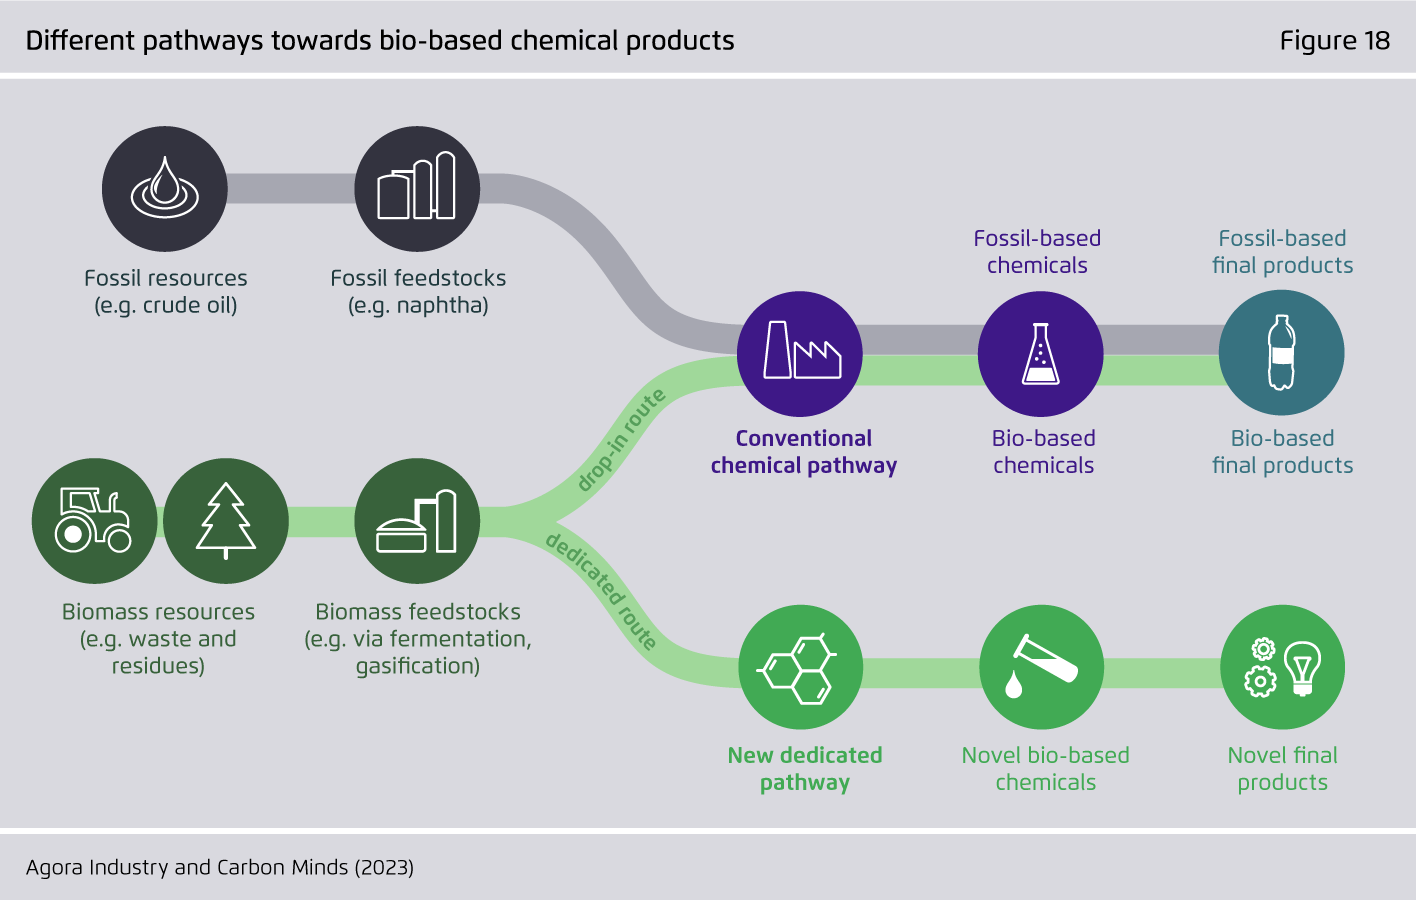 Preview for Different pathways towards bio-based chemical products